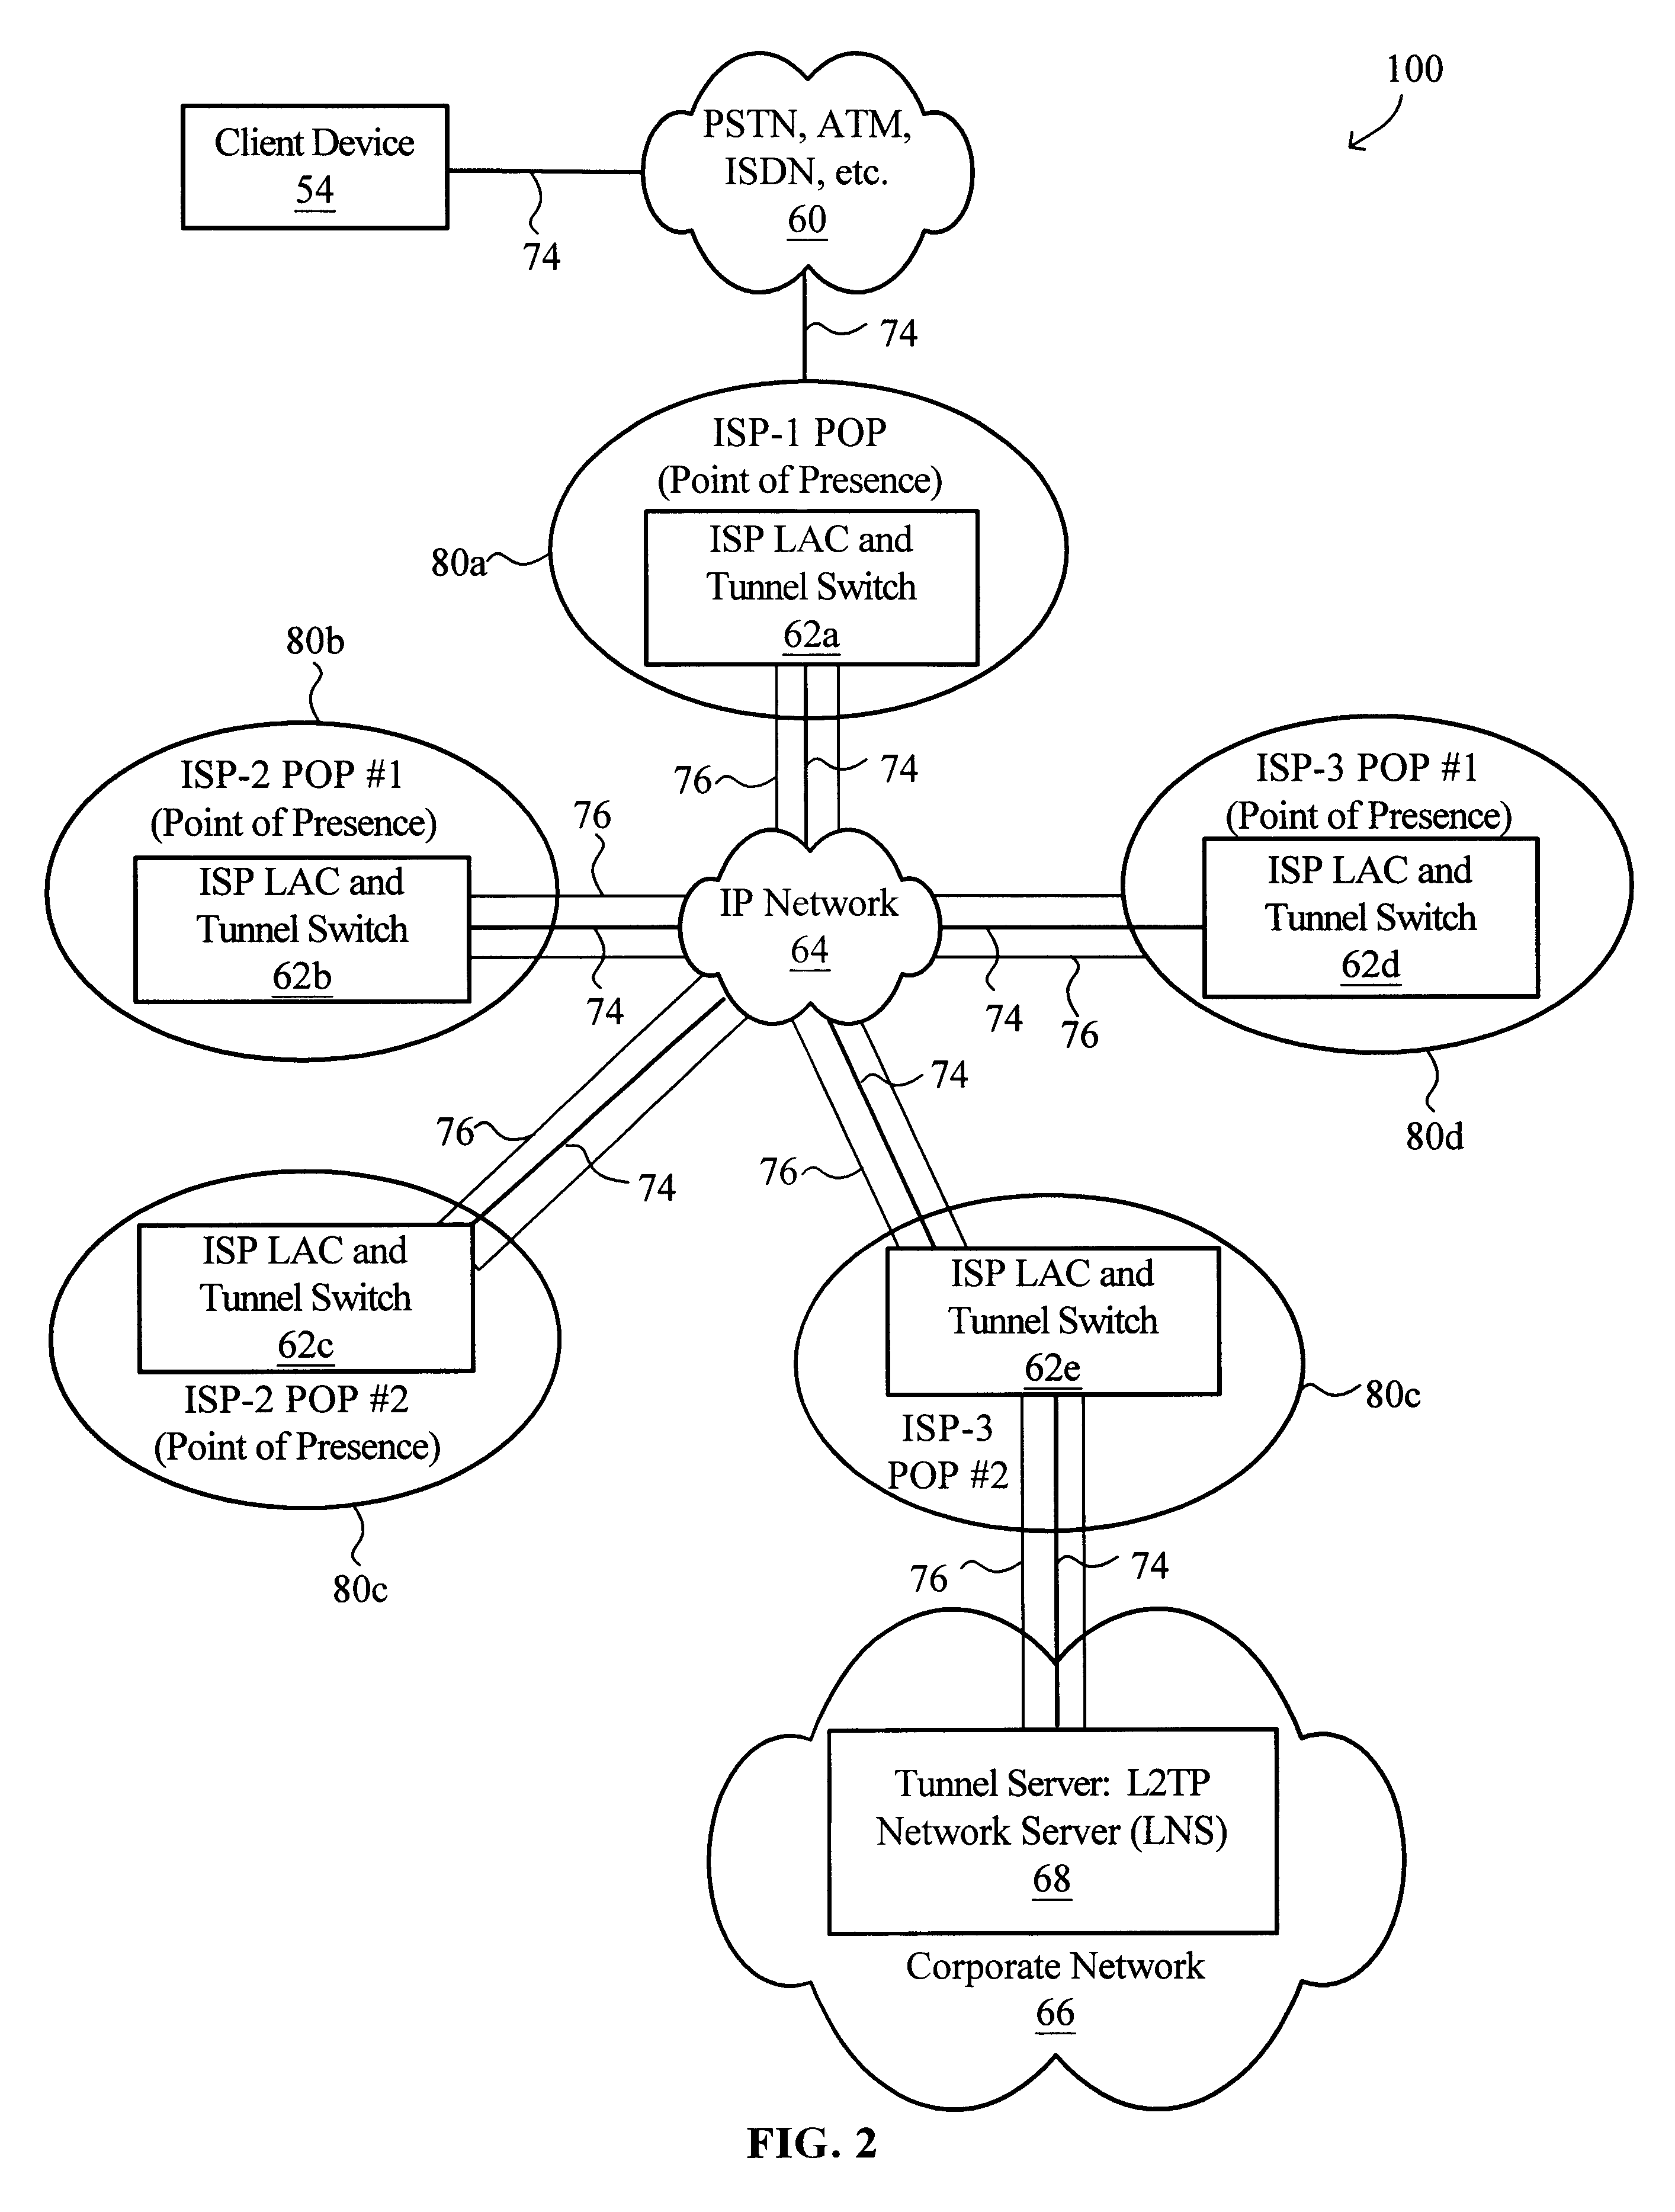 Virtual L2TP/VPN tunnel network and spanning tree-based method for discovery of L2TP/VPN tunnels and other layer-2 services